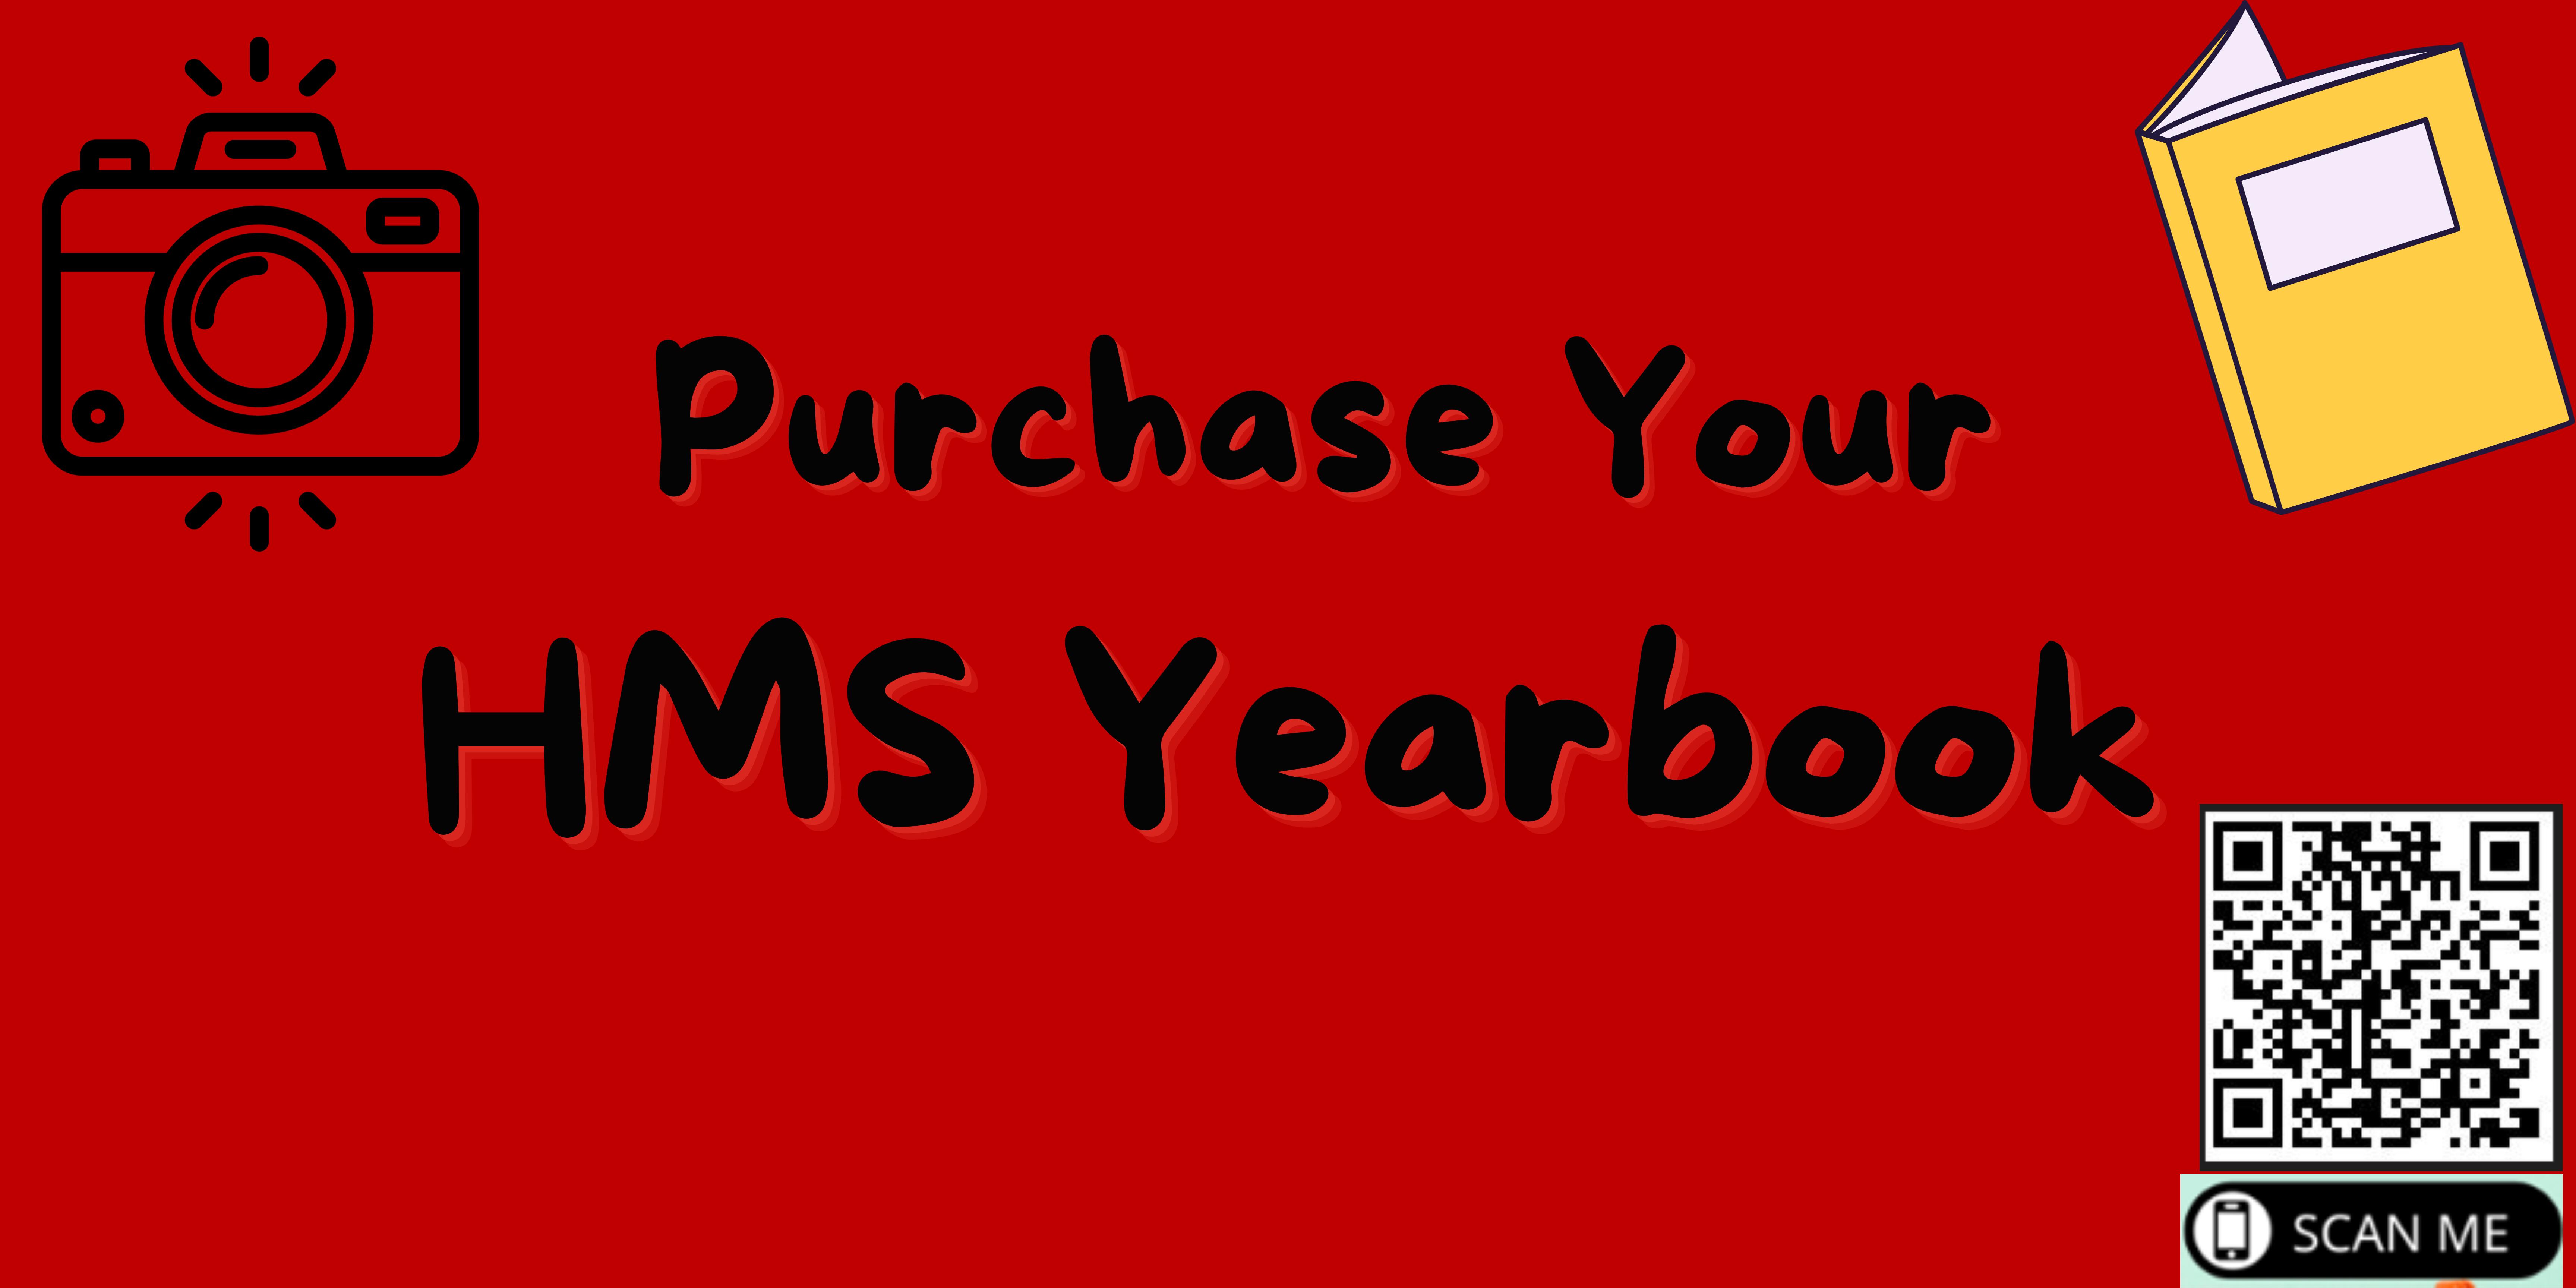 Red graphic with an icon of a camera and text "Purchase your HMS Yearbook" with QR Code